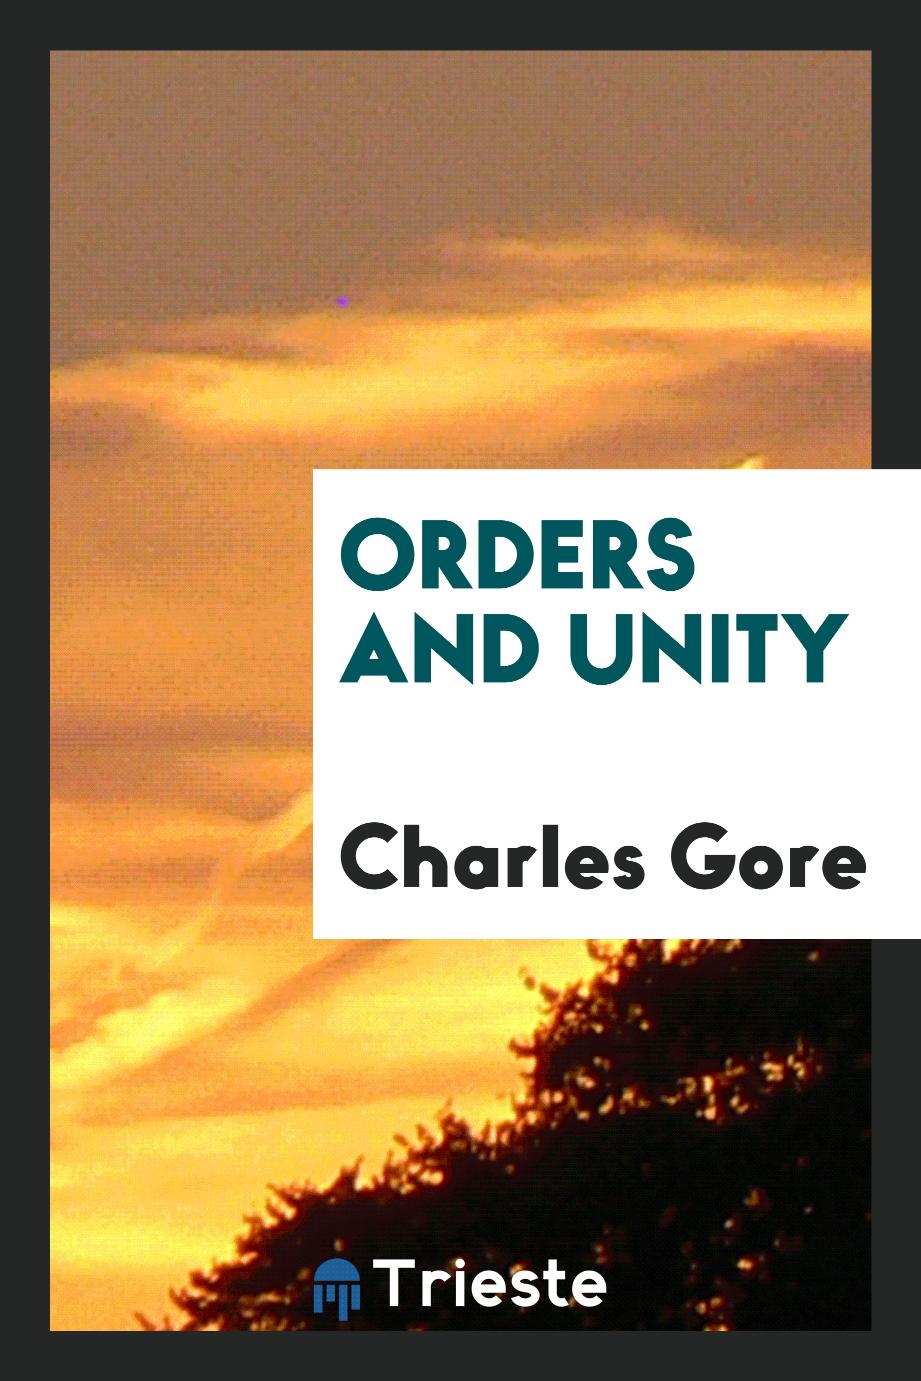 Orders and unity